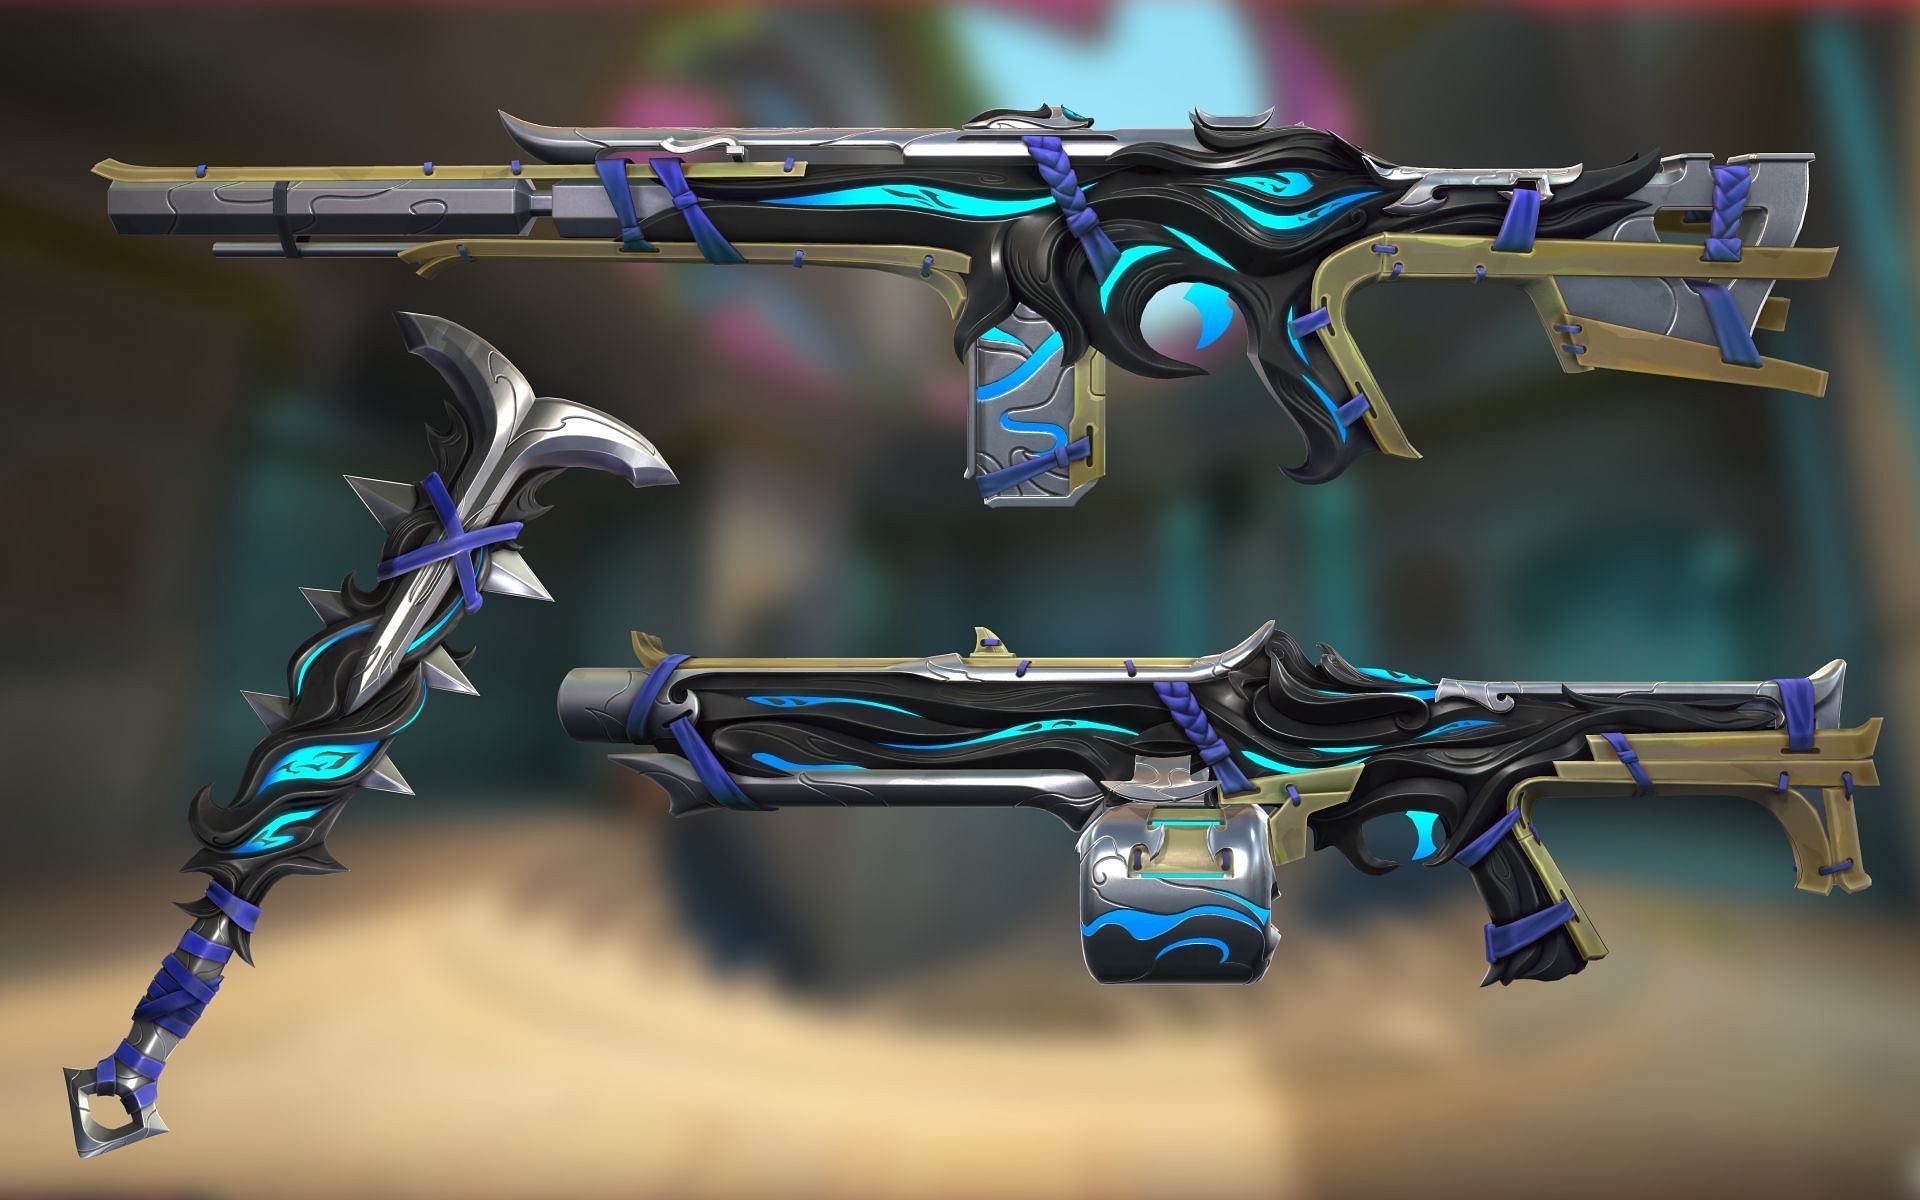 Valorant Bound skin collection: Price, release date, variants, and more (Image via Sportskeeda)